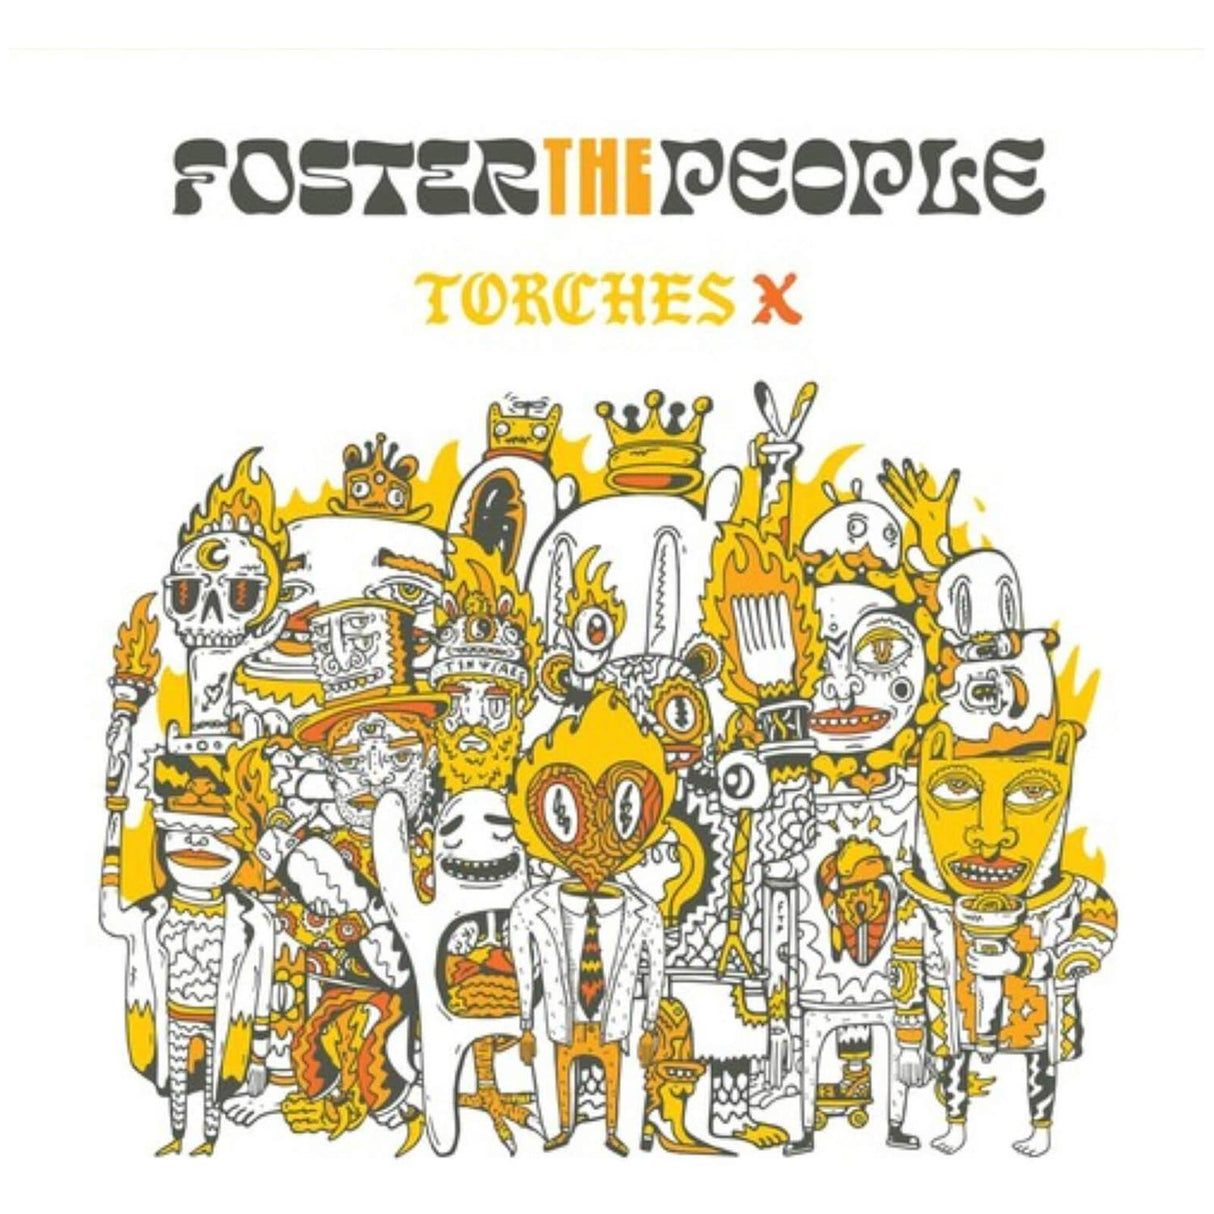 Foster The People - Torches 2LP (Orange Vinyl Special Edition)